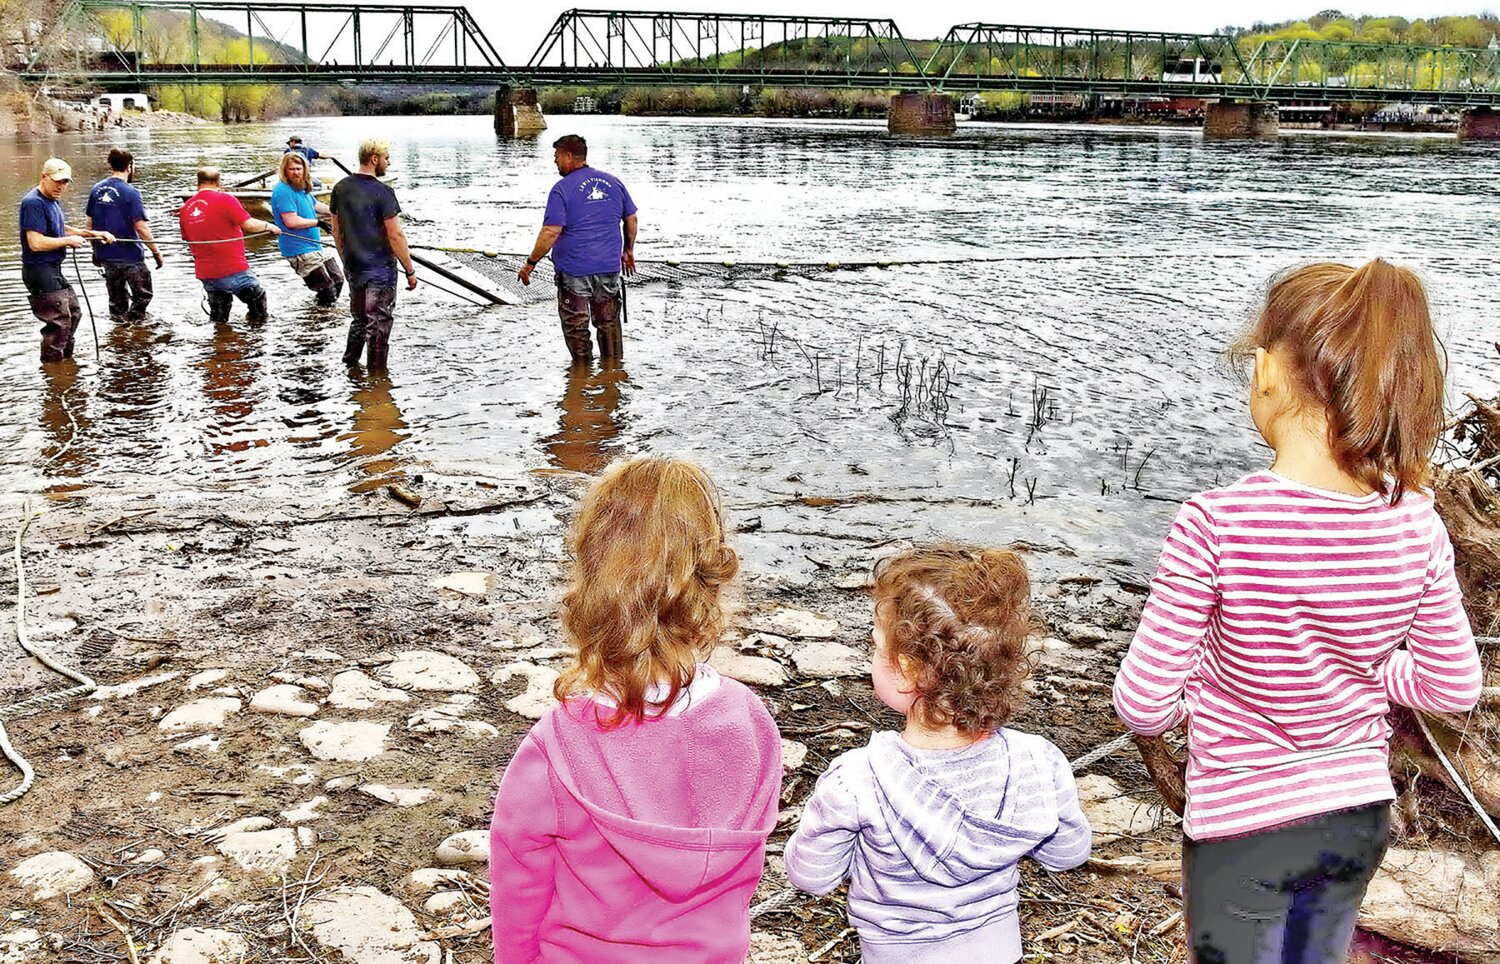 Children watch shad being caught in a net at last year’s Shad Fest in Lambertville, N.J.